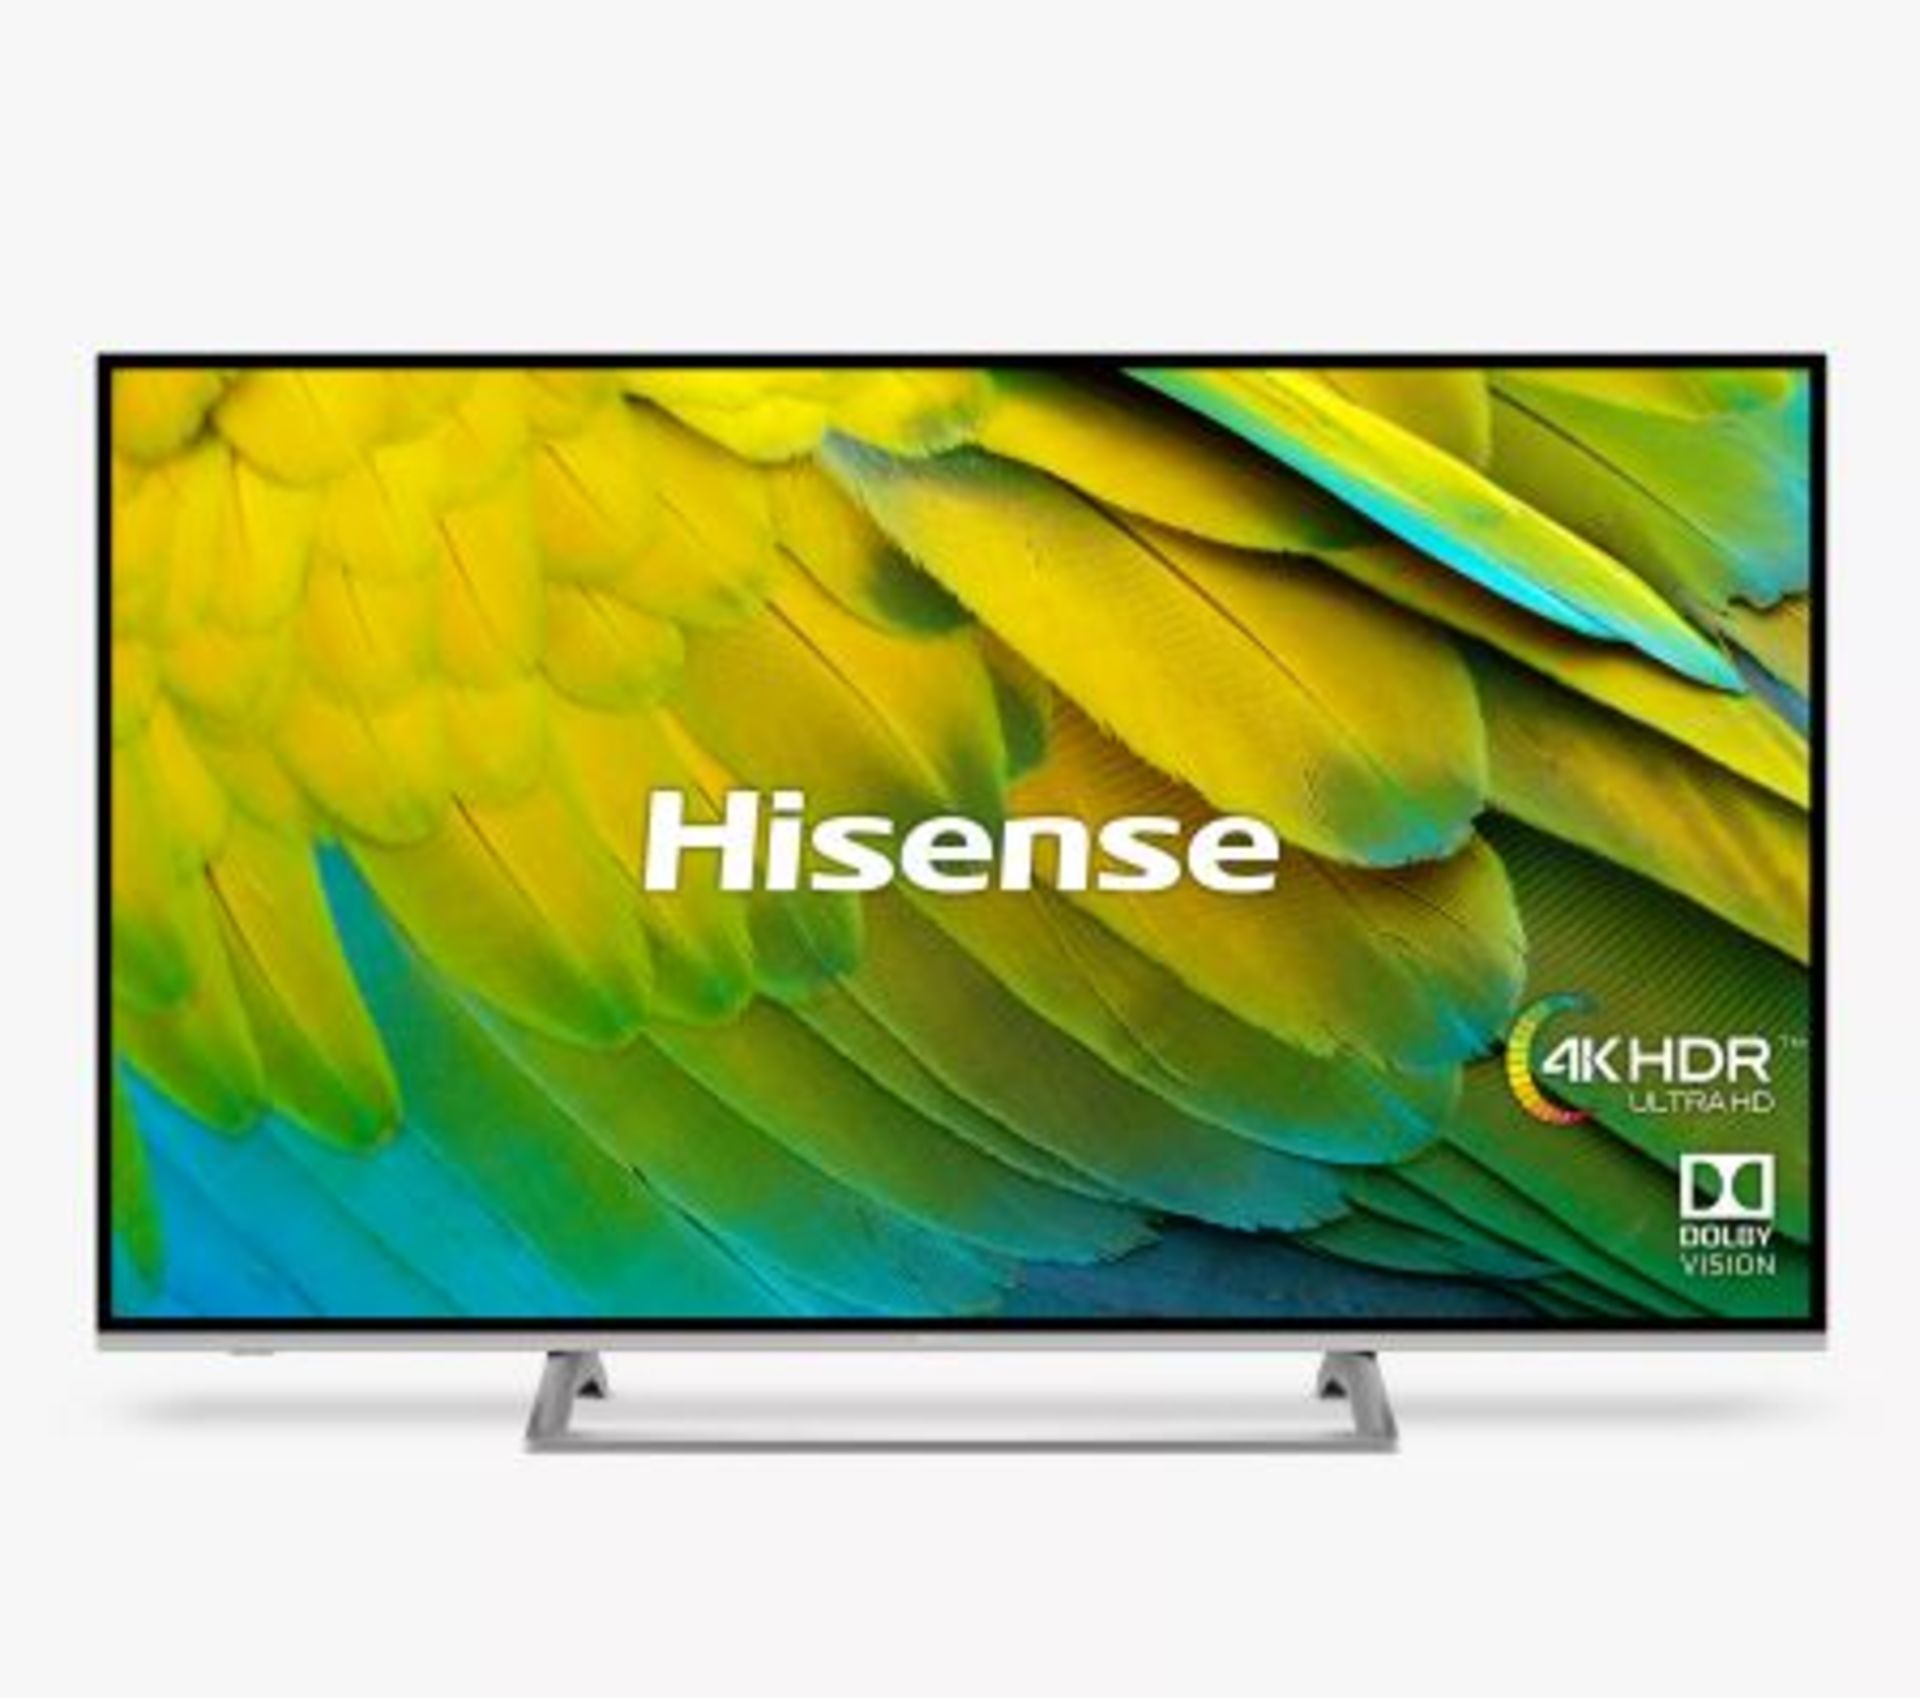 1 HISENSE H65B7500 65" 4K ULTRA HD SMART HDR LED TV WITH DOLBY VISION WITH STAND AND REMOTE RRP Â£